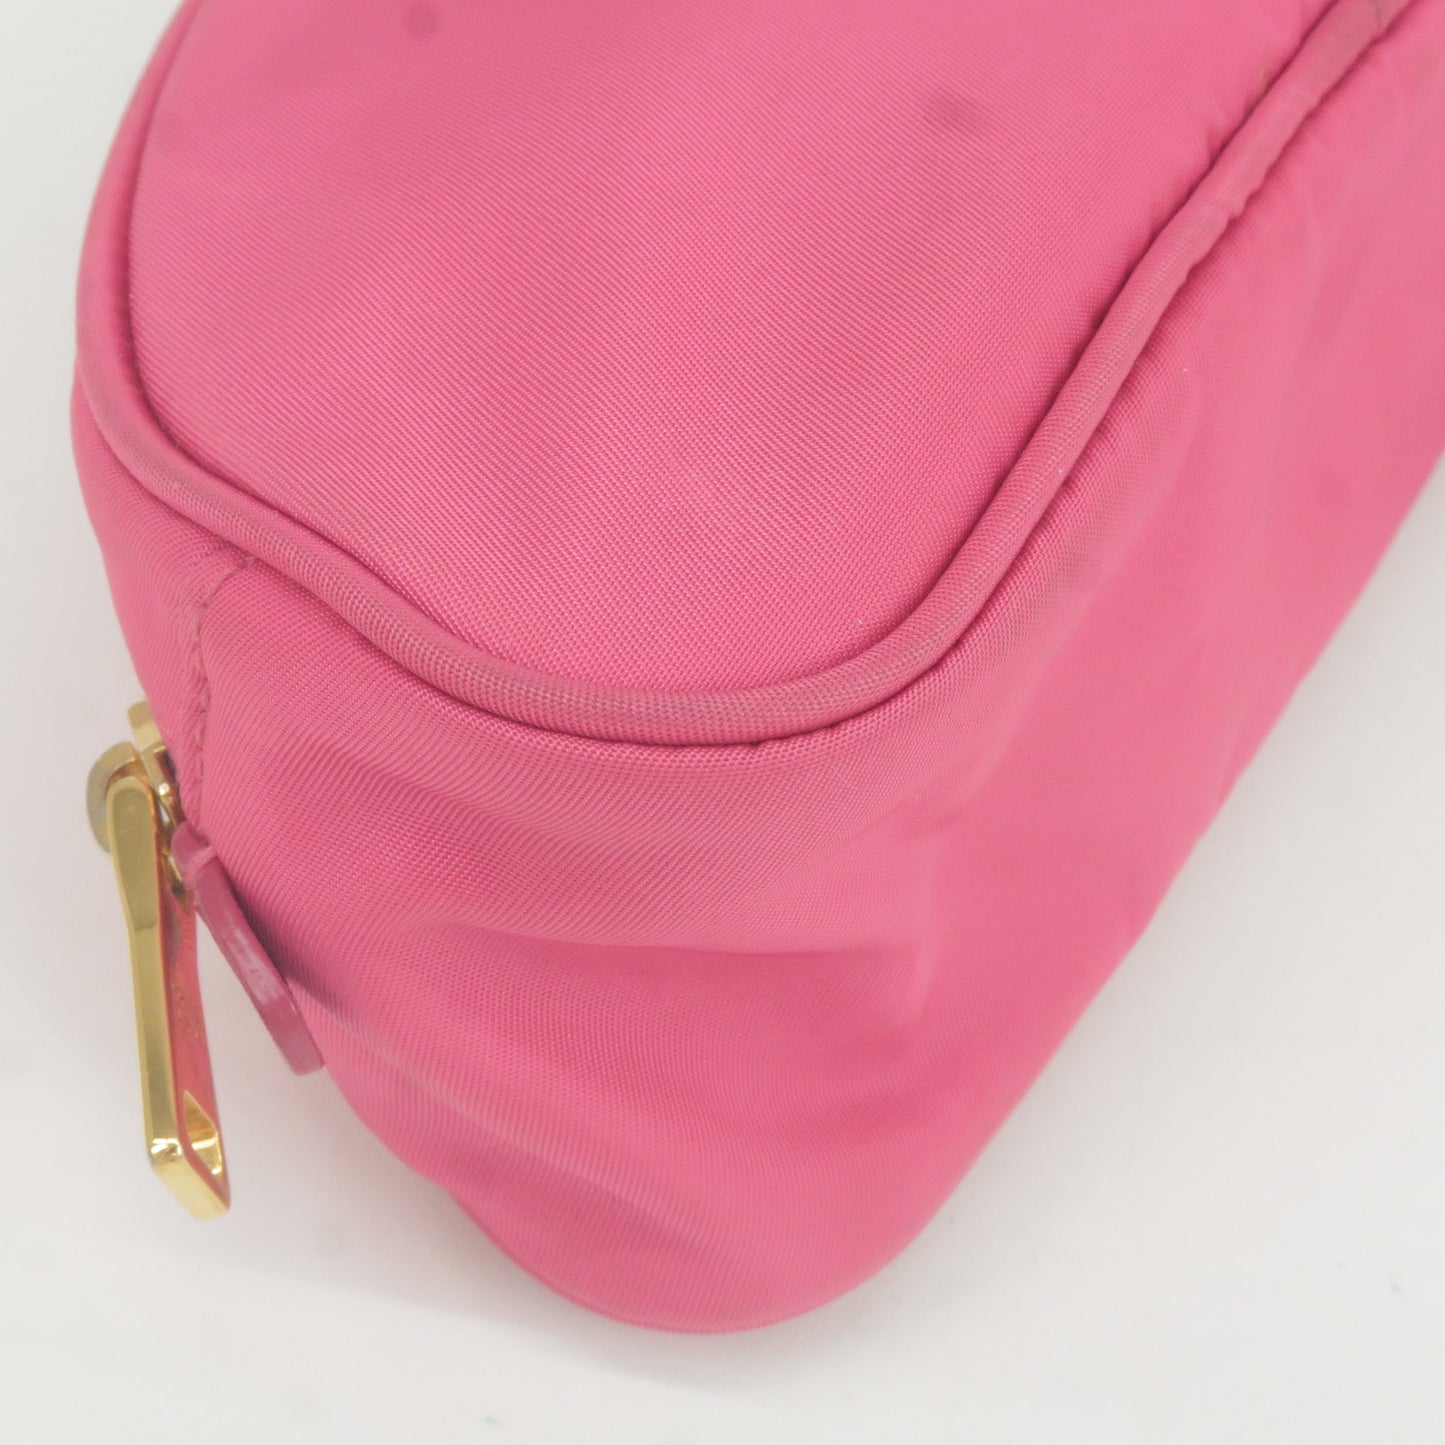 PRADA Logo Nylon Leather Pouch Cosmetic Pouch Pink 1N1867